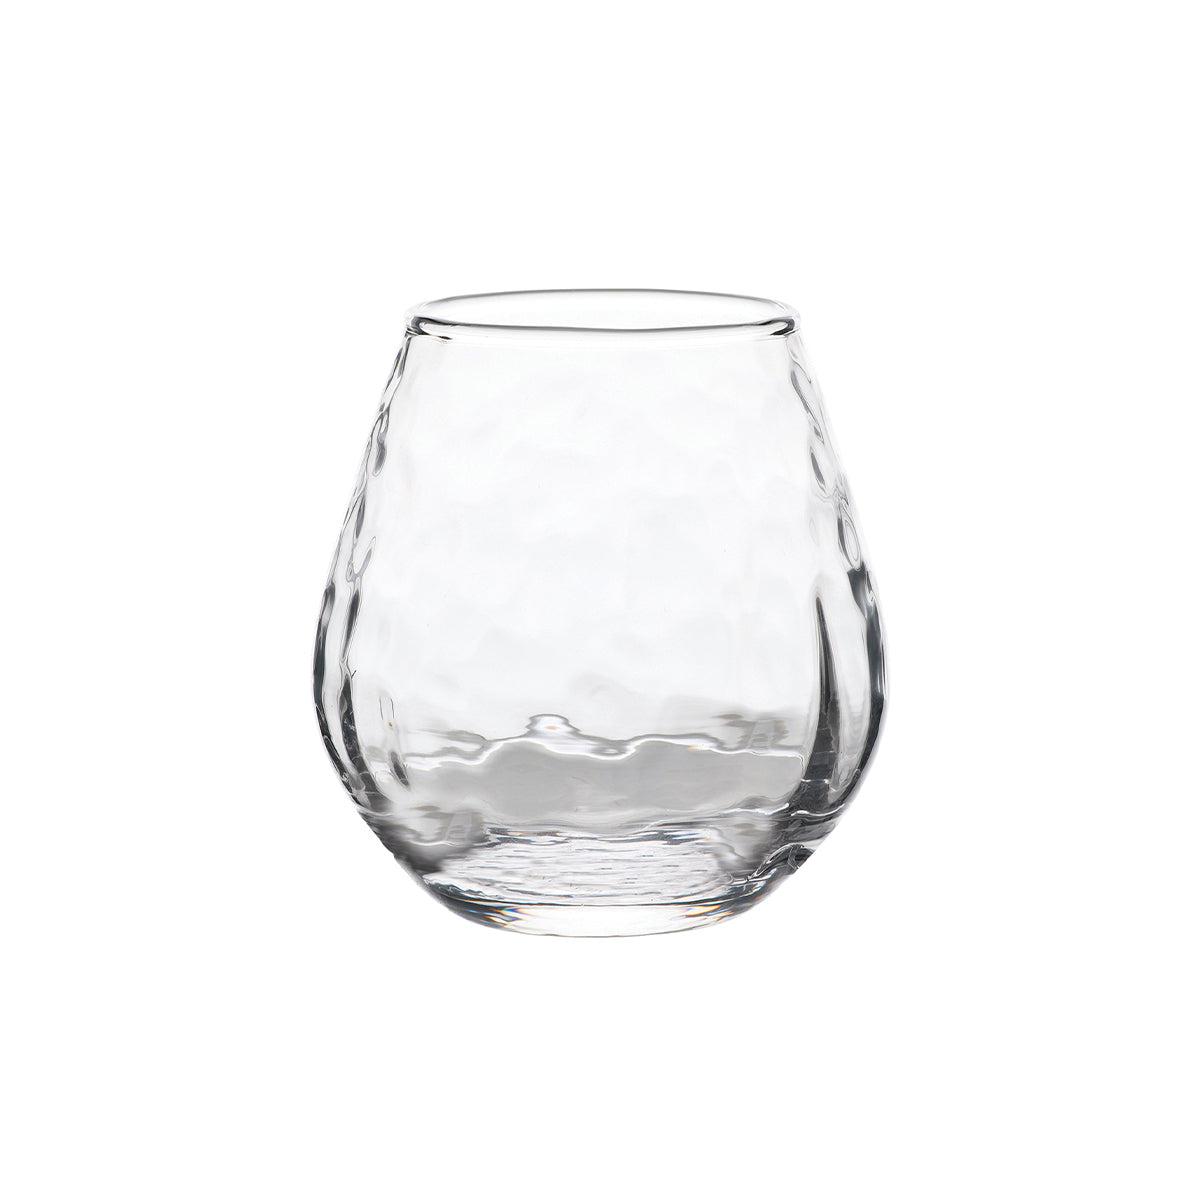 This subtly shimmering and stemless wine glass is crafted of sturdy mouth-blown glass to celebrate life's simple pleasures every day.